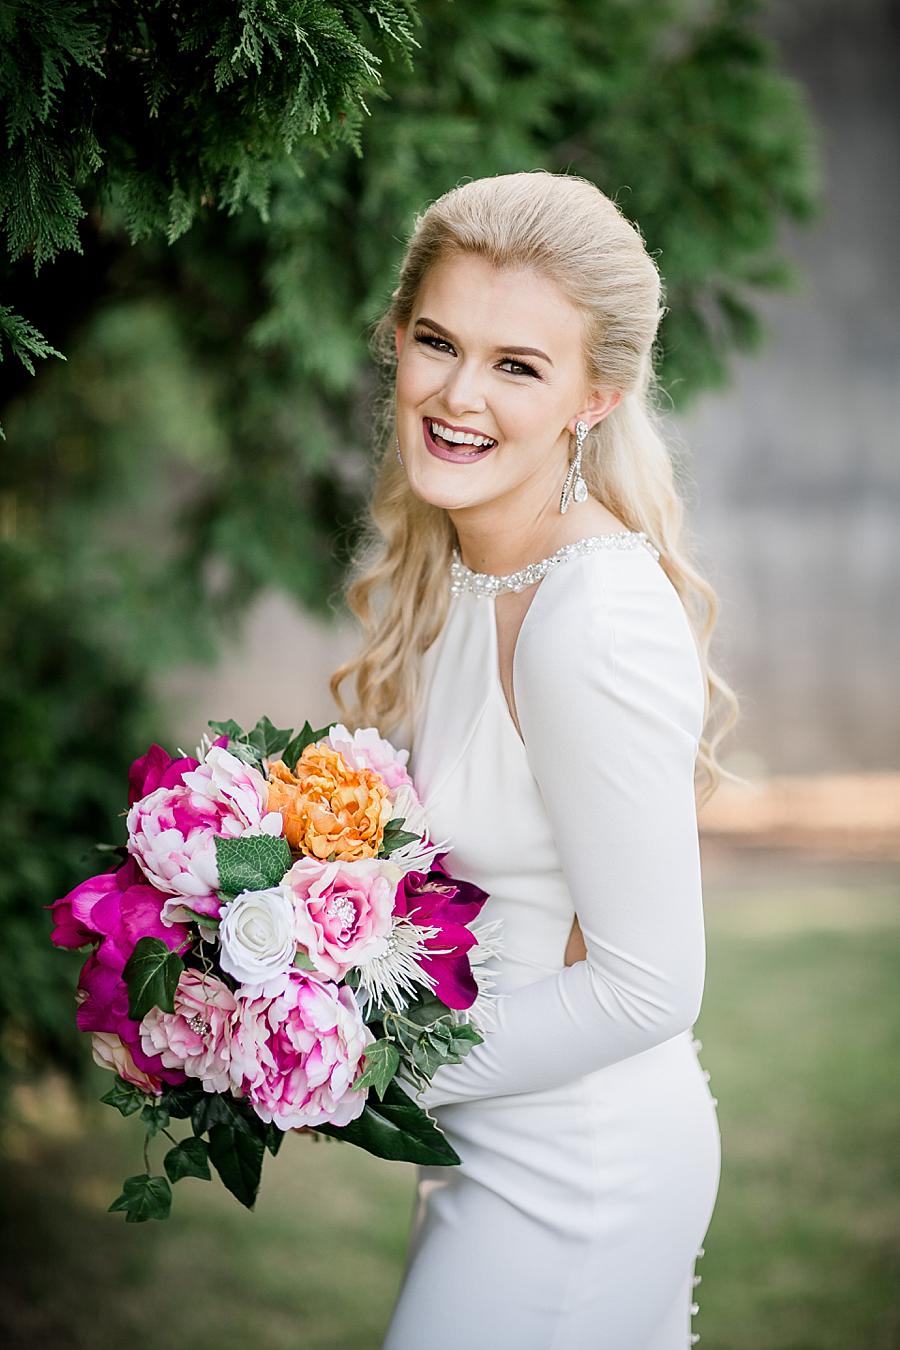 Bouquet of pinks at this Crescent Bend Bridal Session by Knoxville Wedding Photographer, Amanda May Photos.